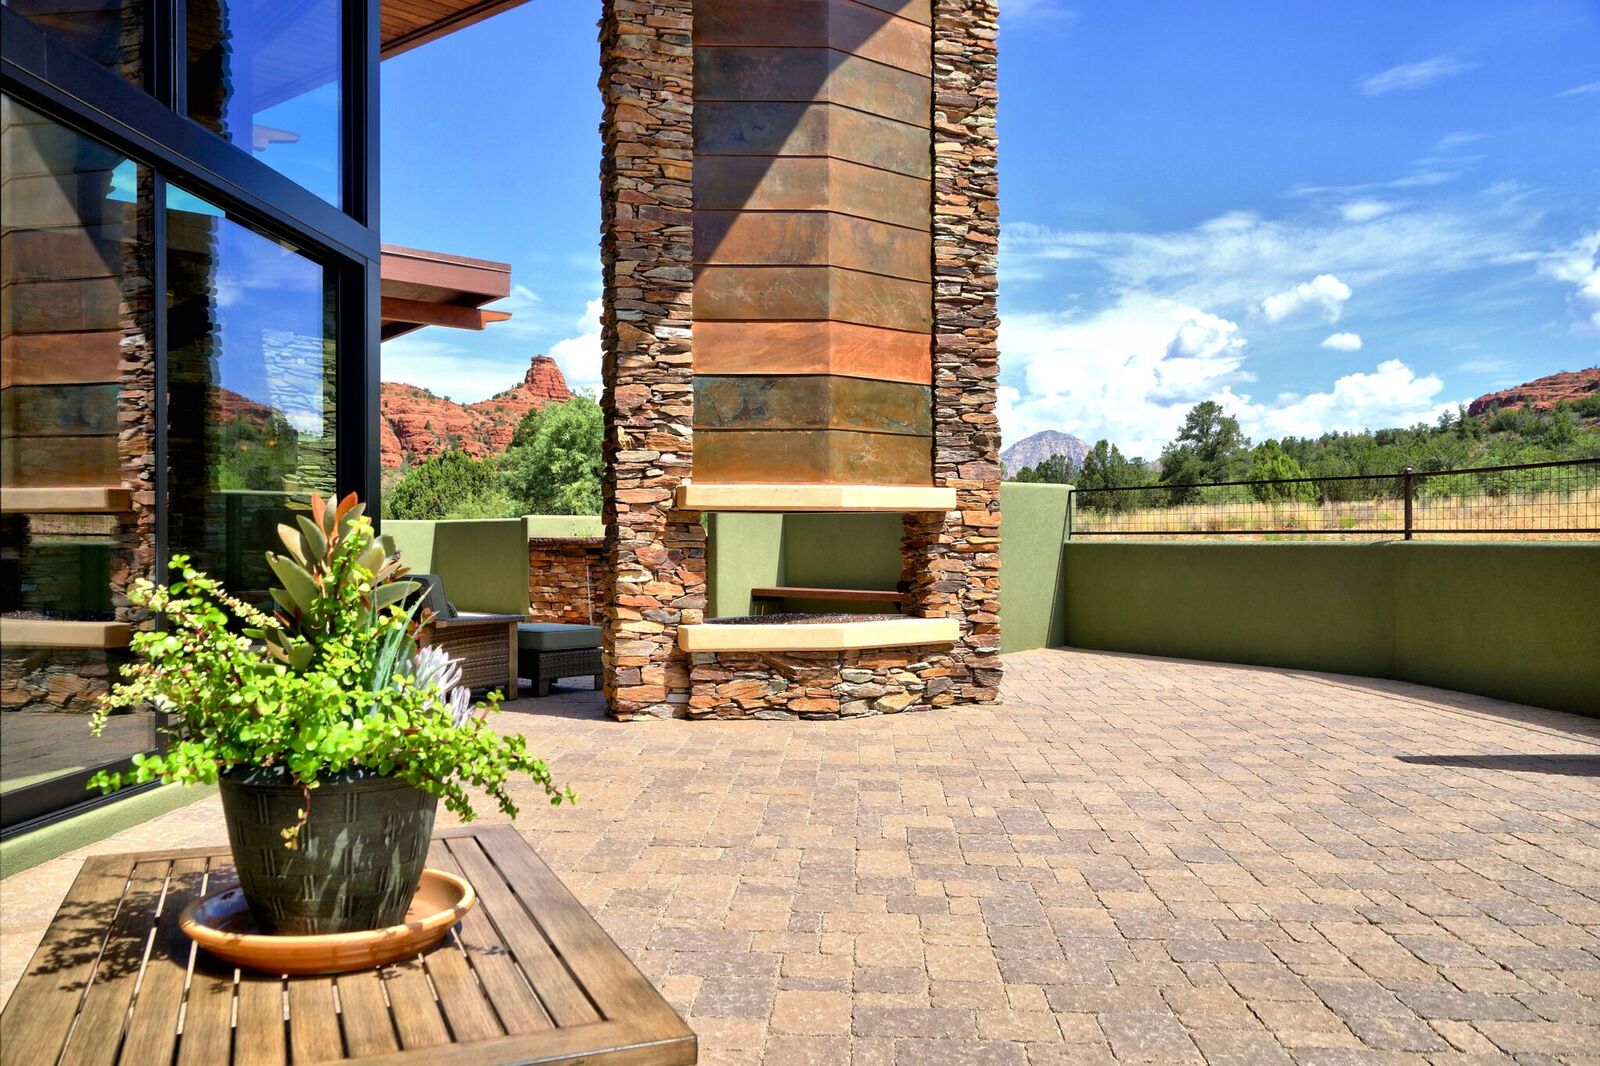 A patio with a fireplace and plants in the middle of it.